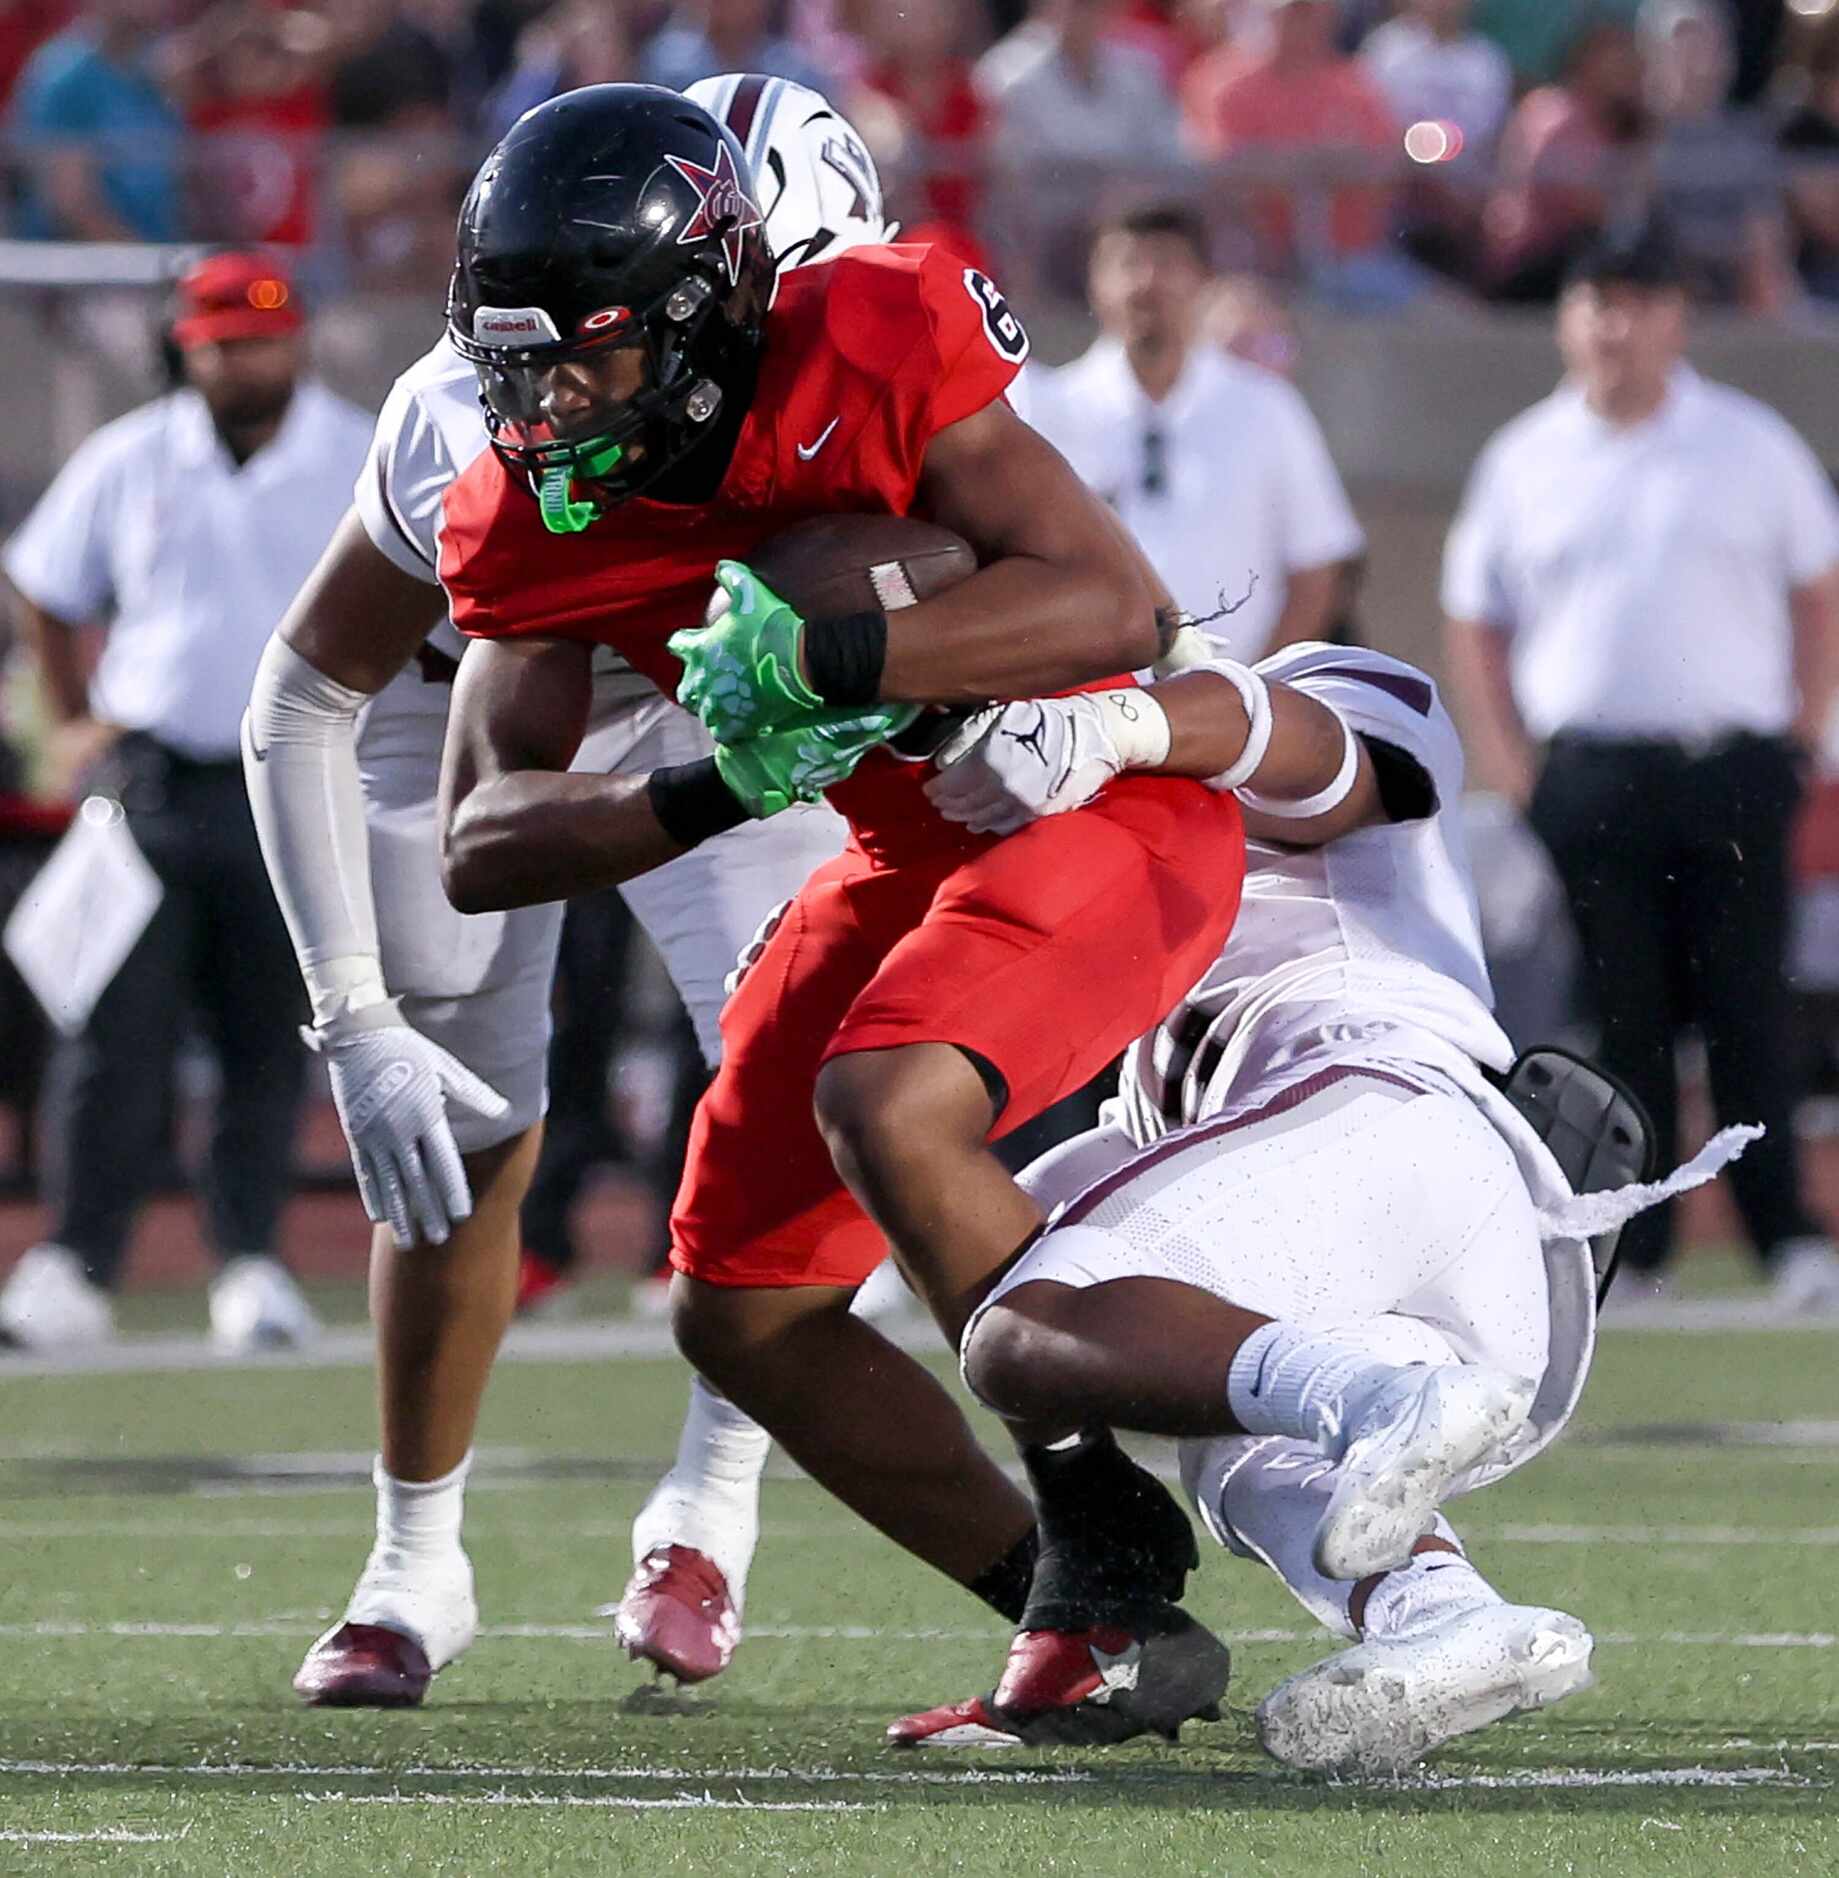 Coppell running back O'Marion Mbakwe (6) tries to break a tackle against Lewisville...